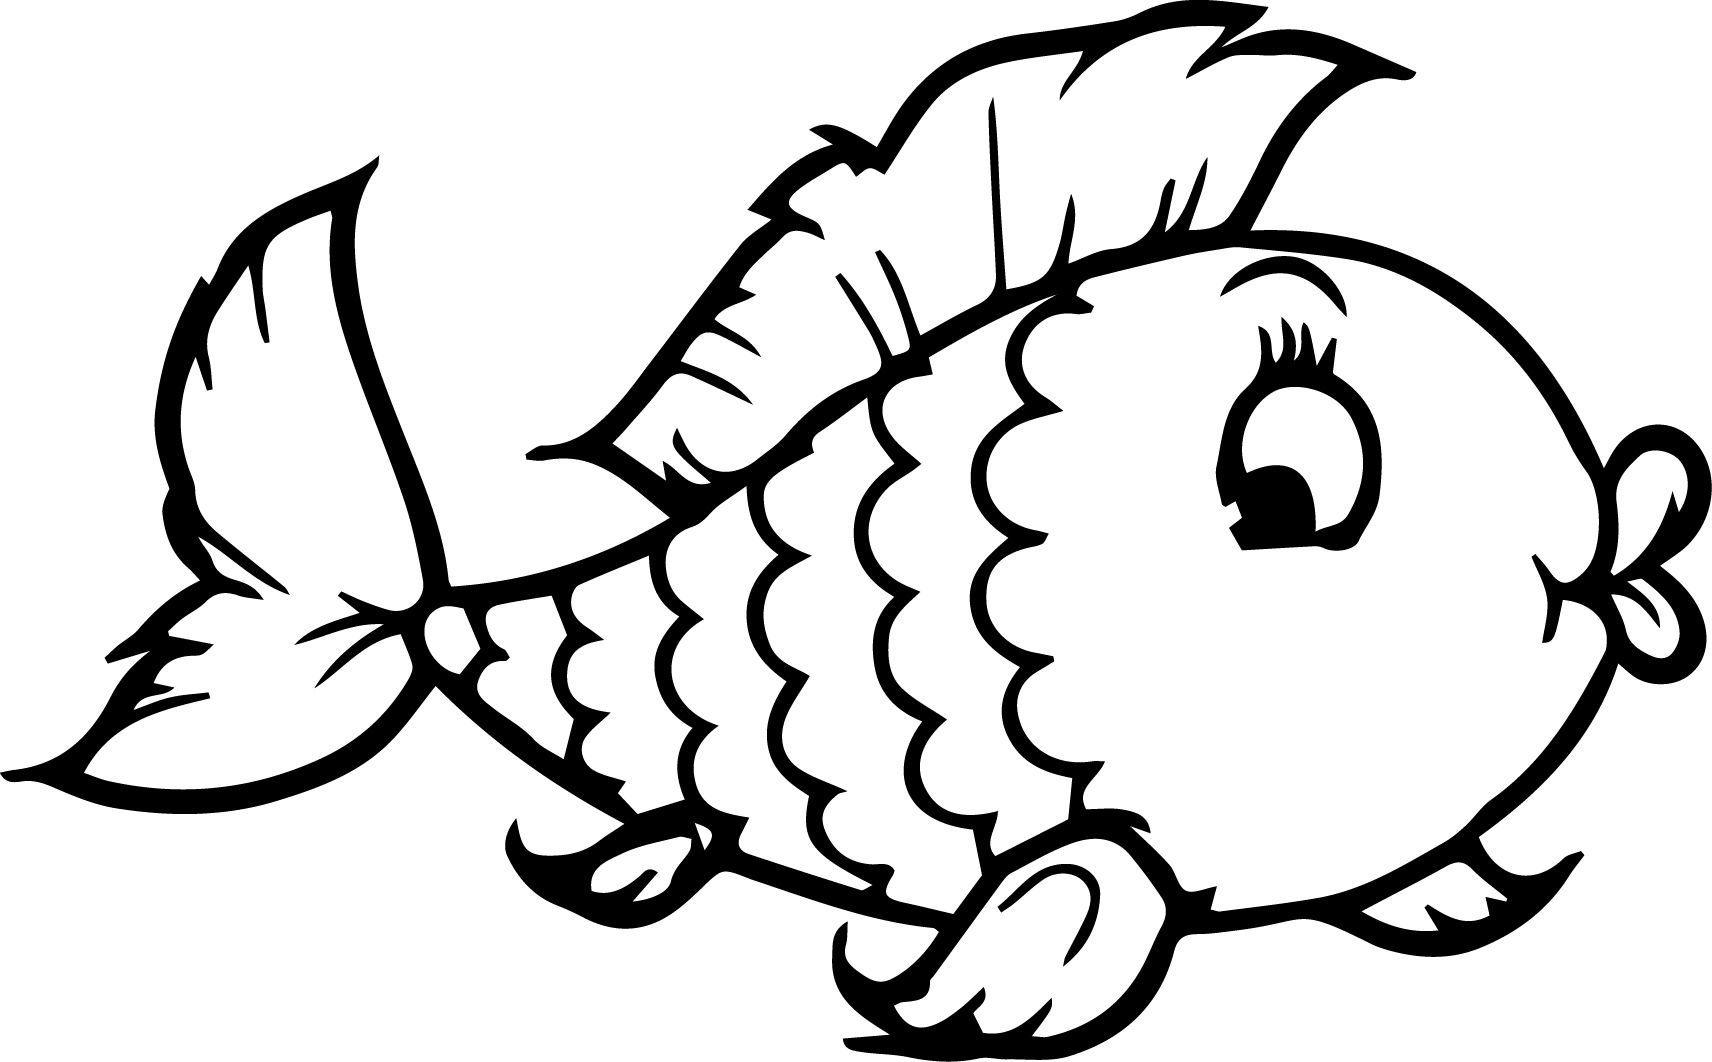 Coloring pages pin.